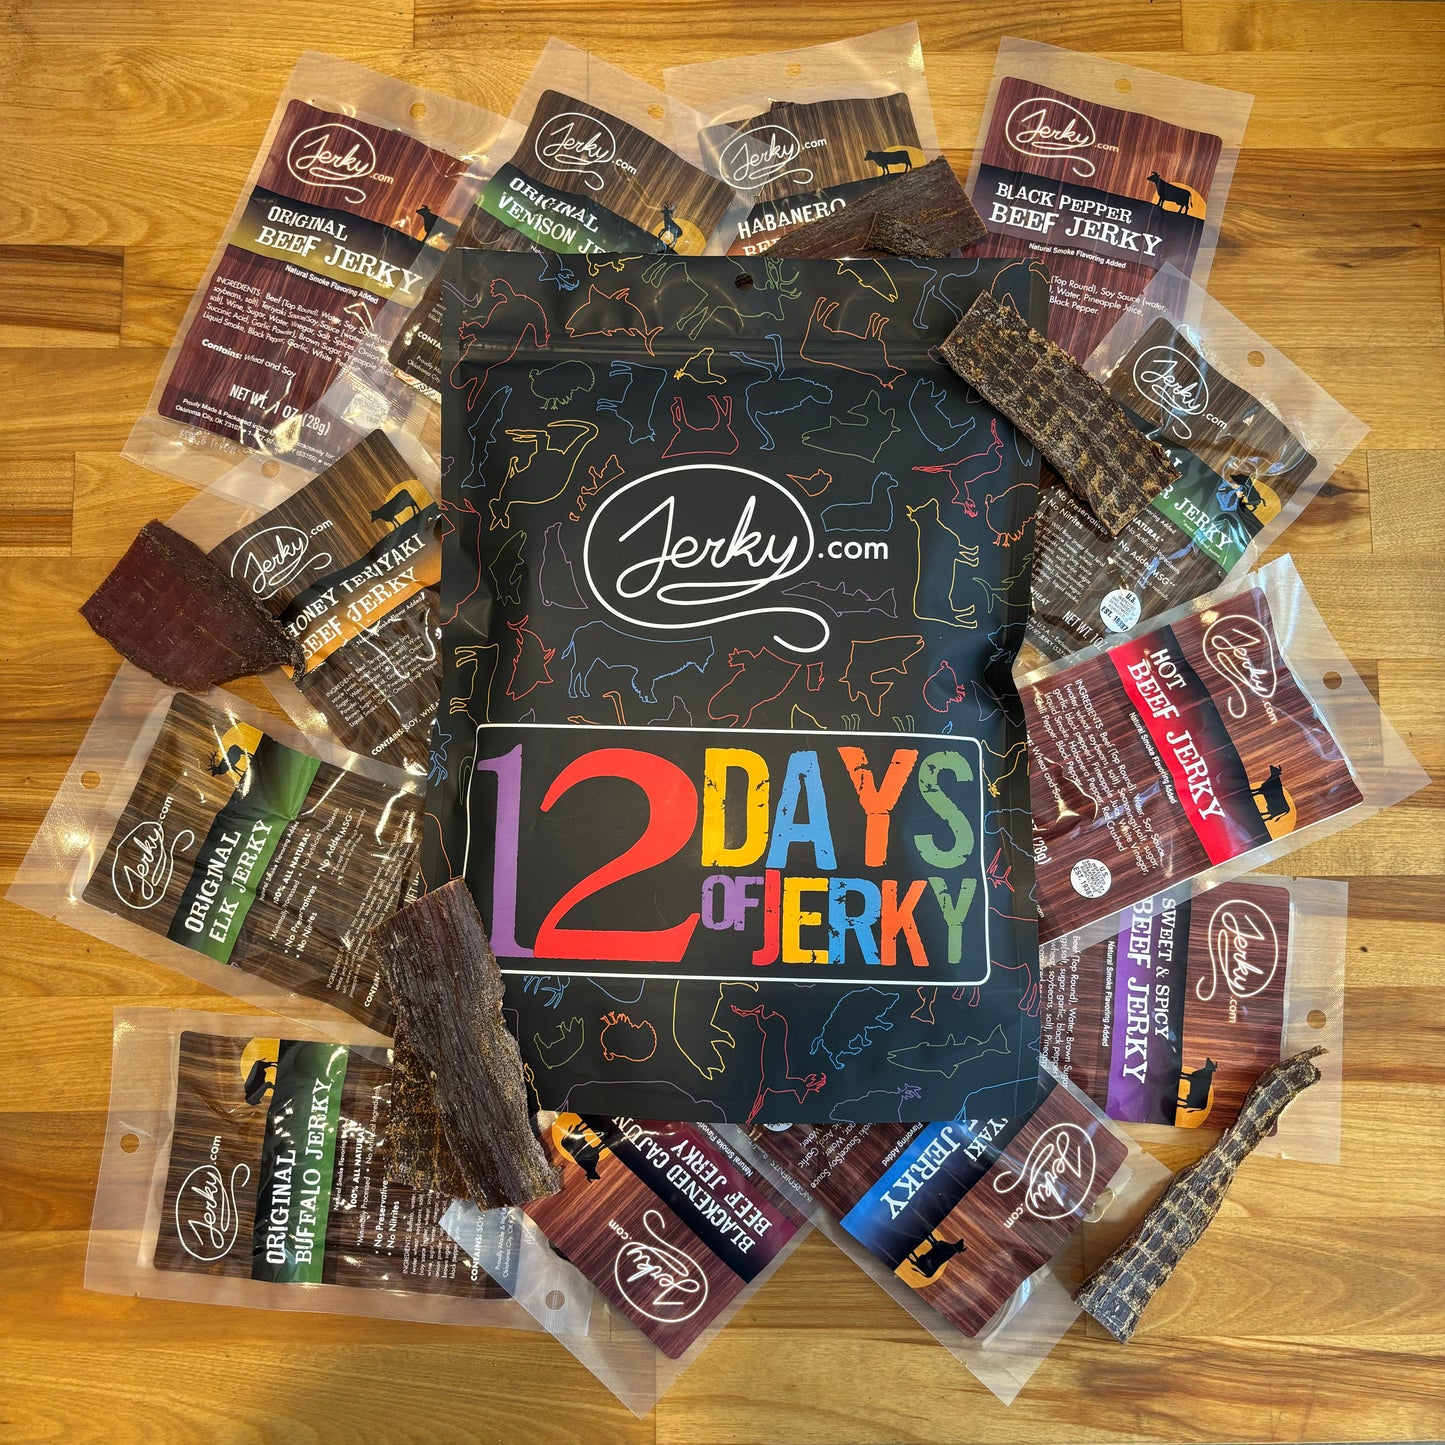 The 12 Days of Jerky Gift Package by Jerky.com